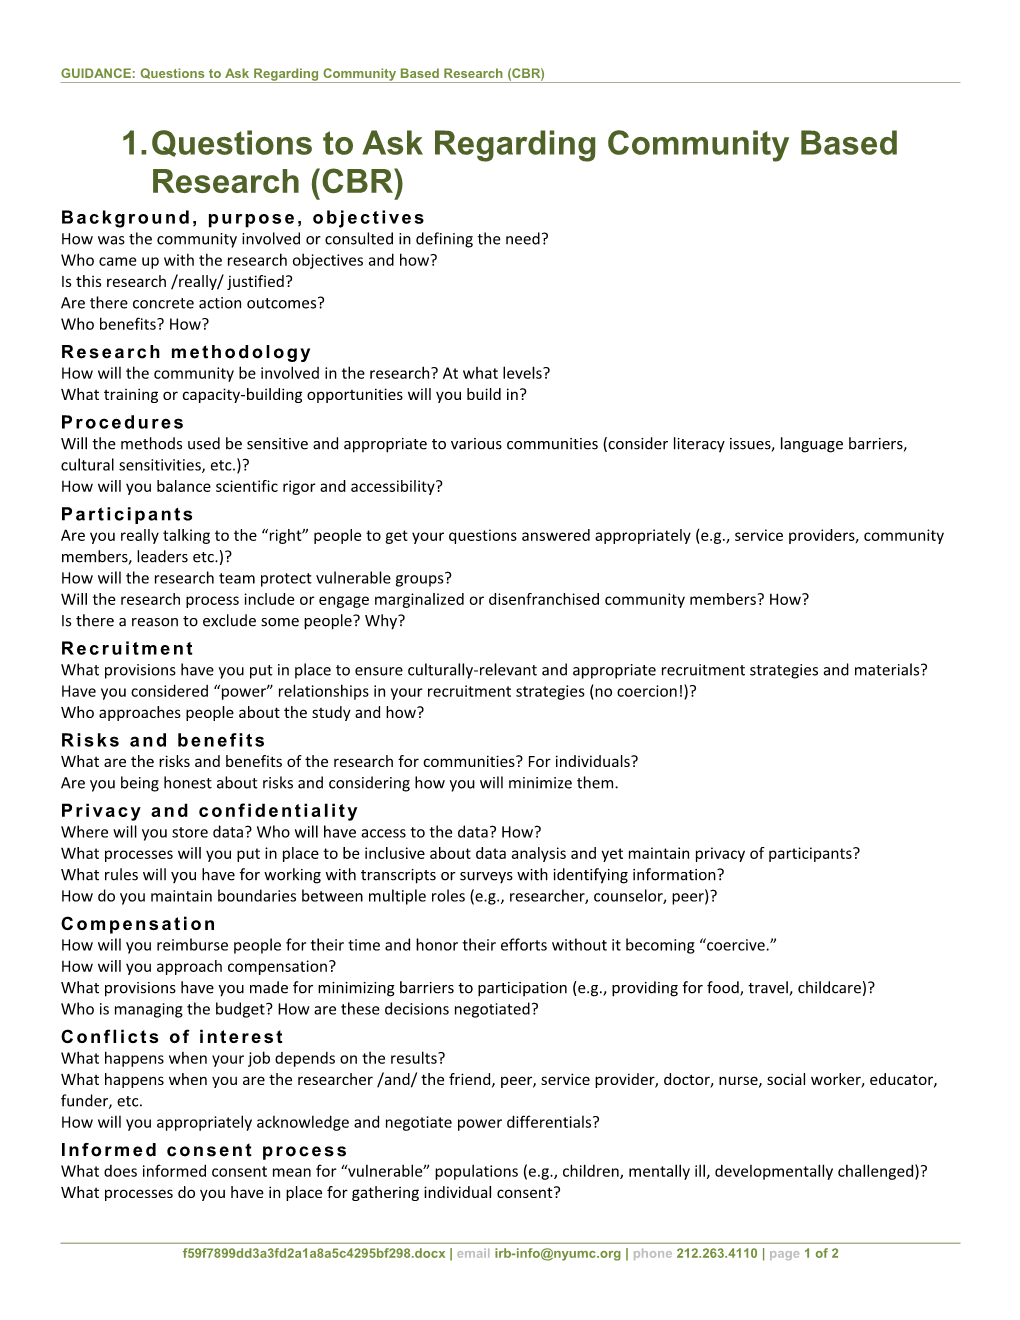 GUIDANCE: Questions to Ask Regarding Community Based Research (CBR)